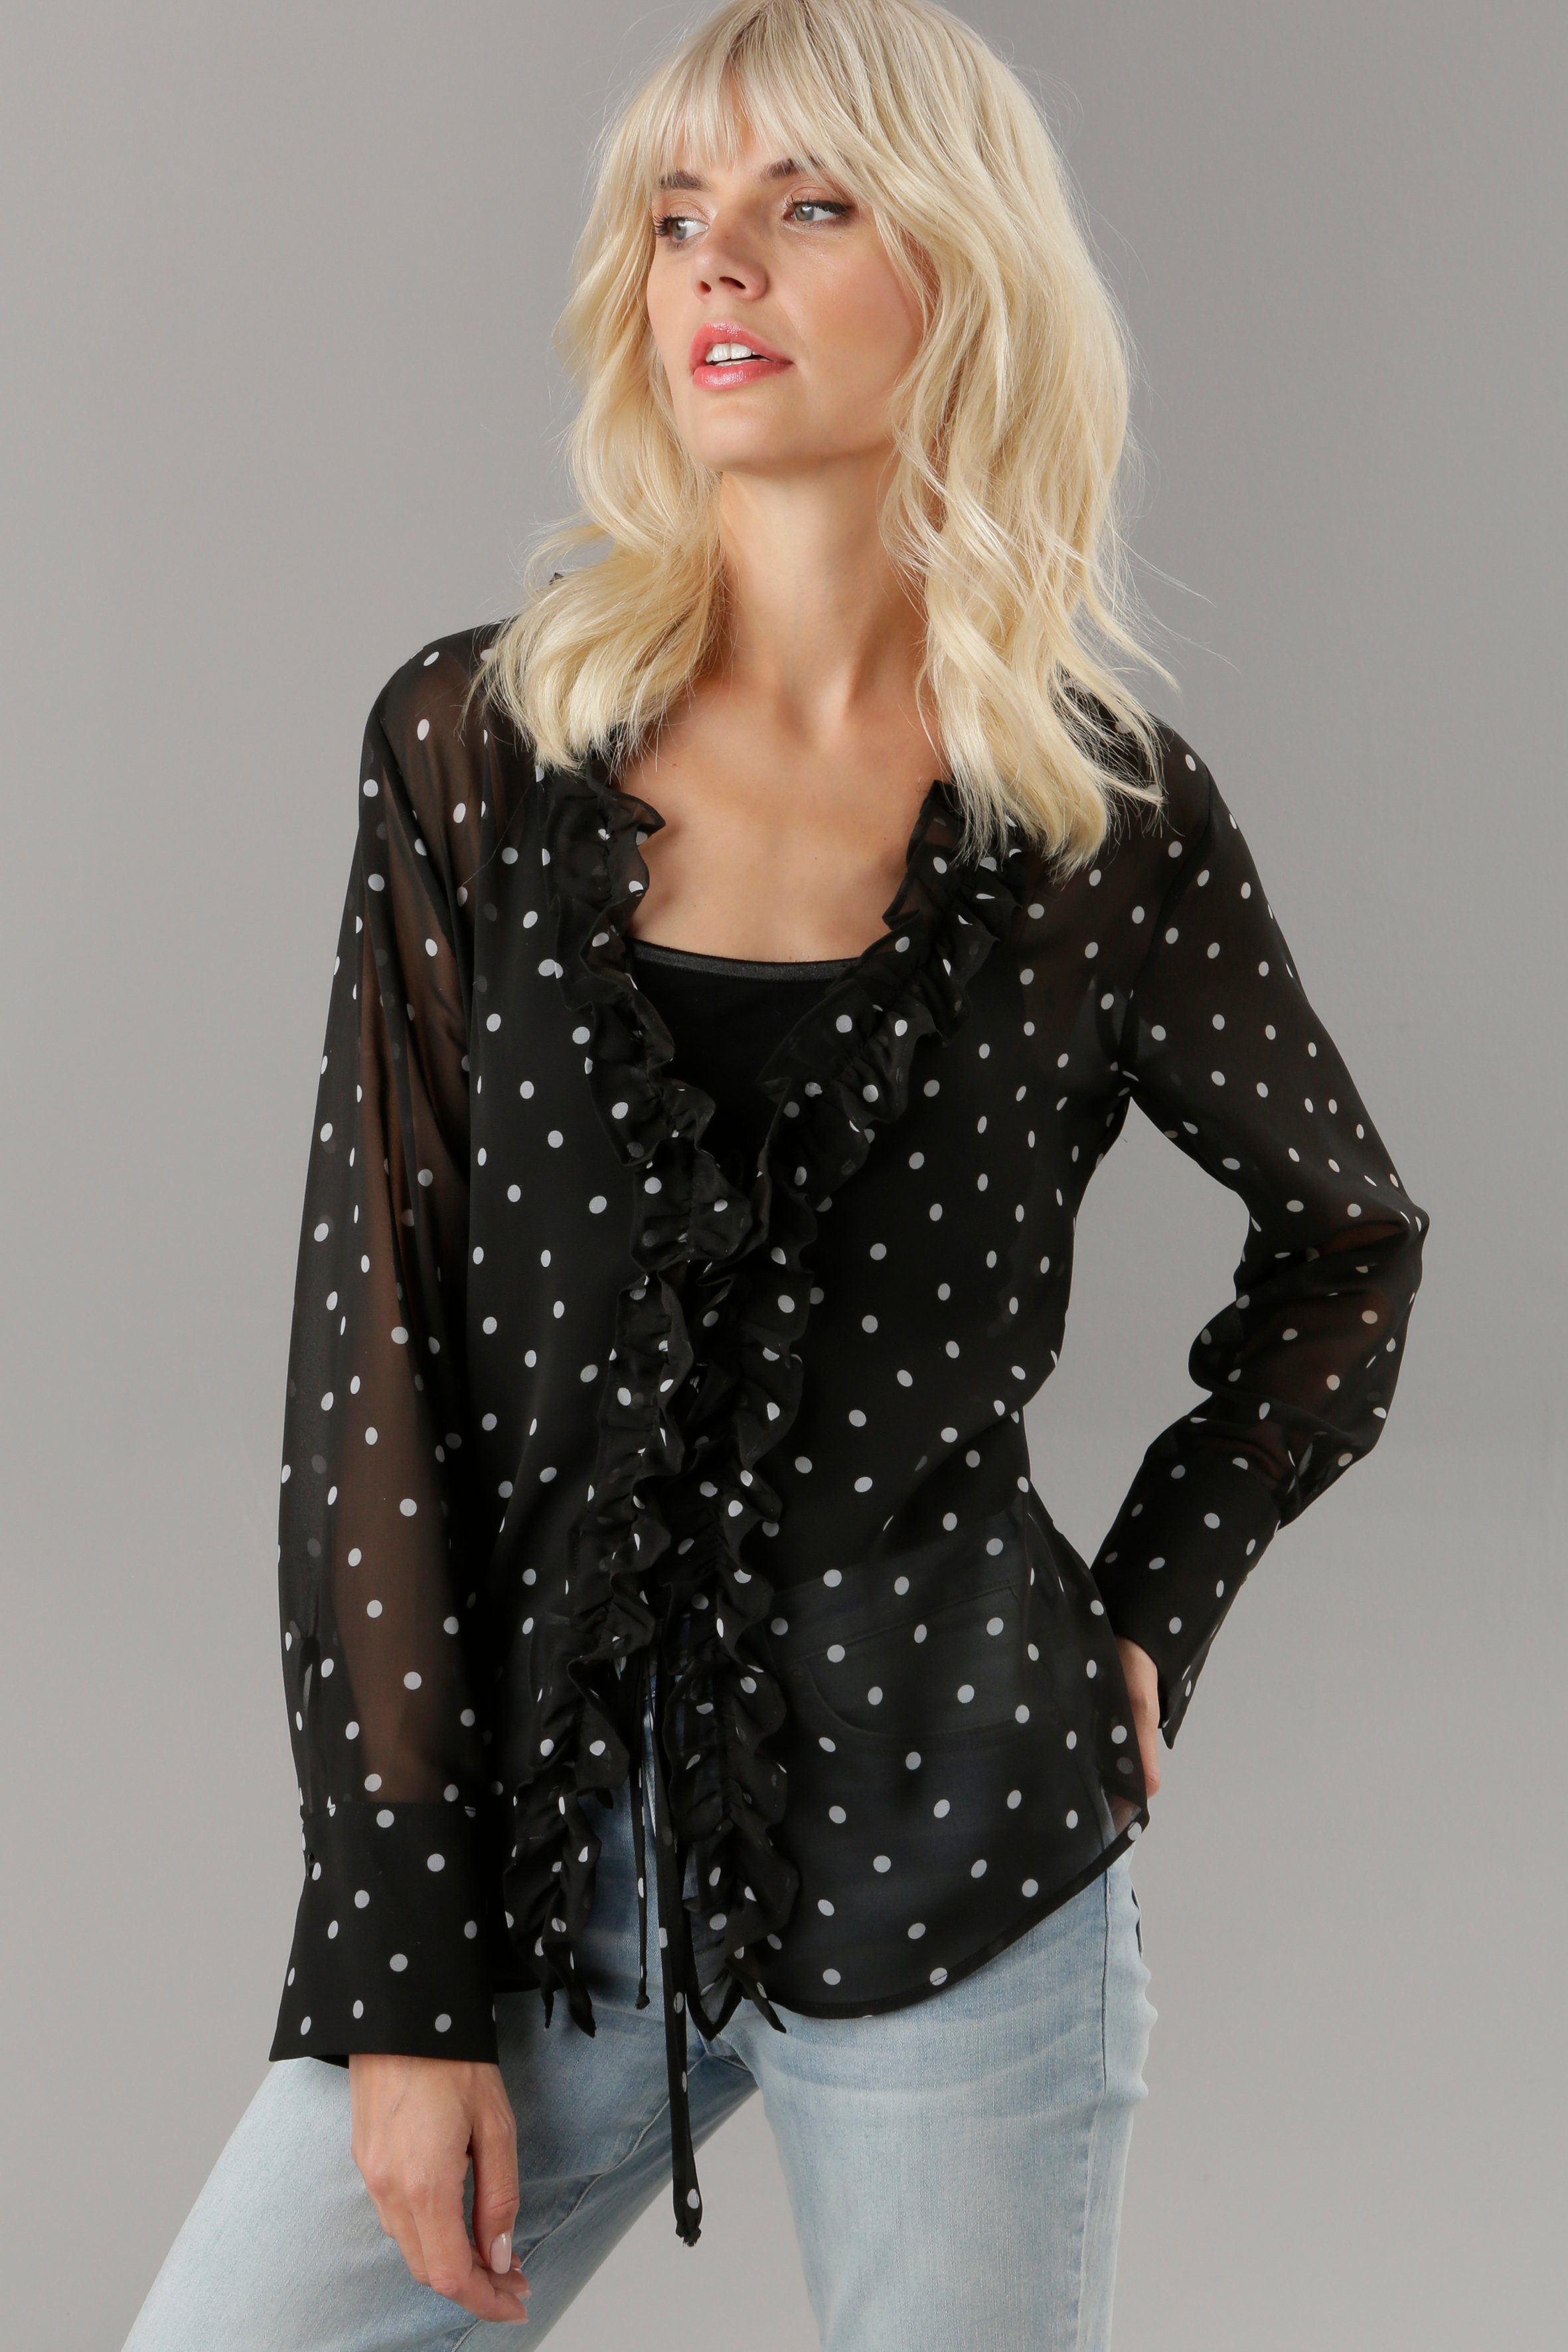 Volants Chiffonbluse SELECTED Aniston mit